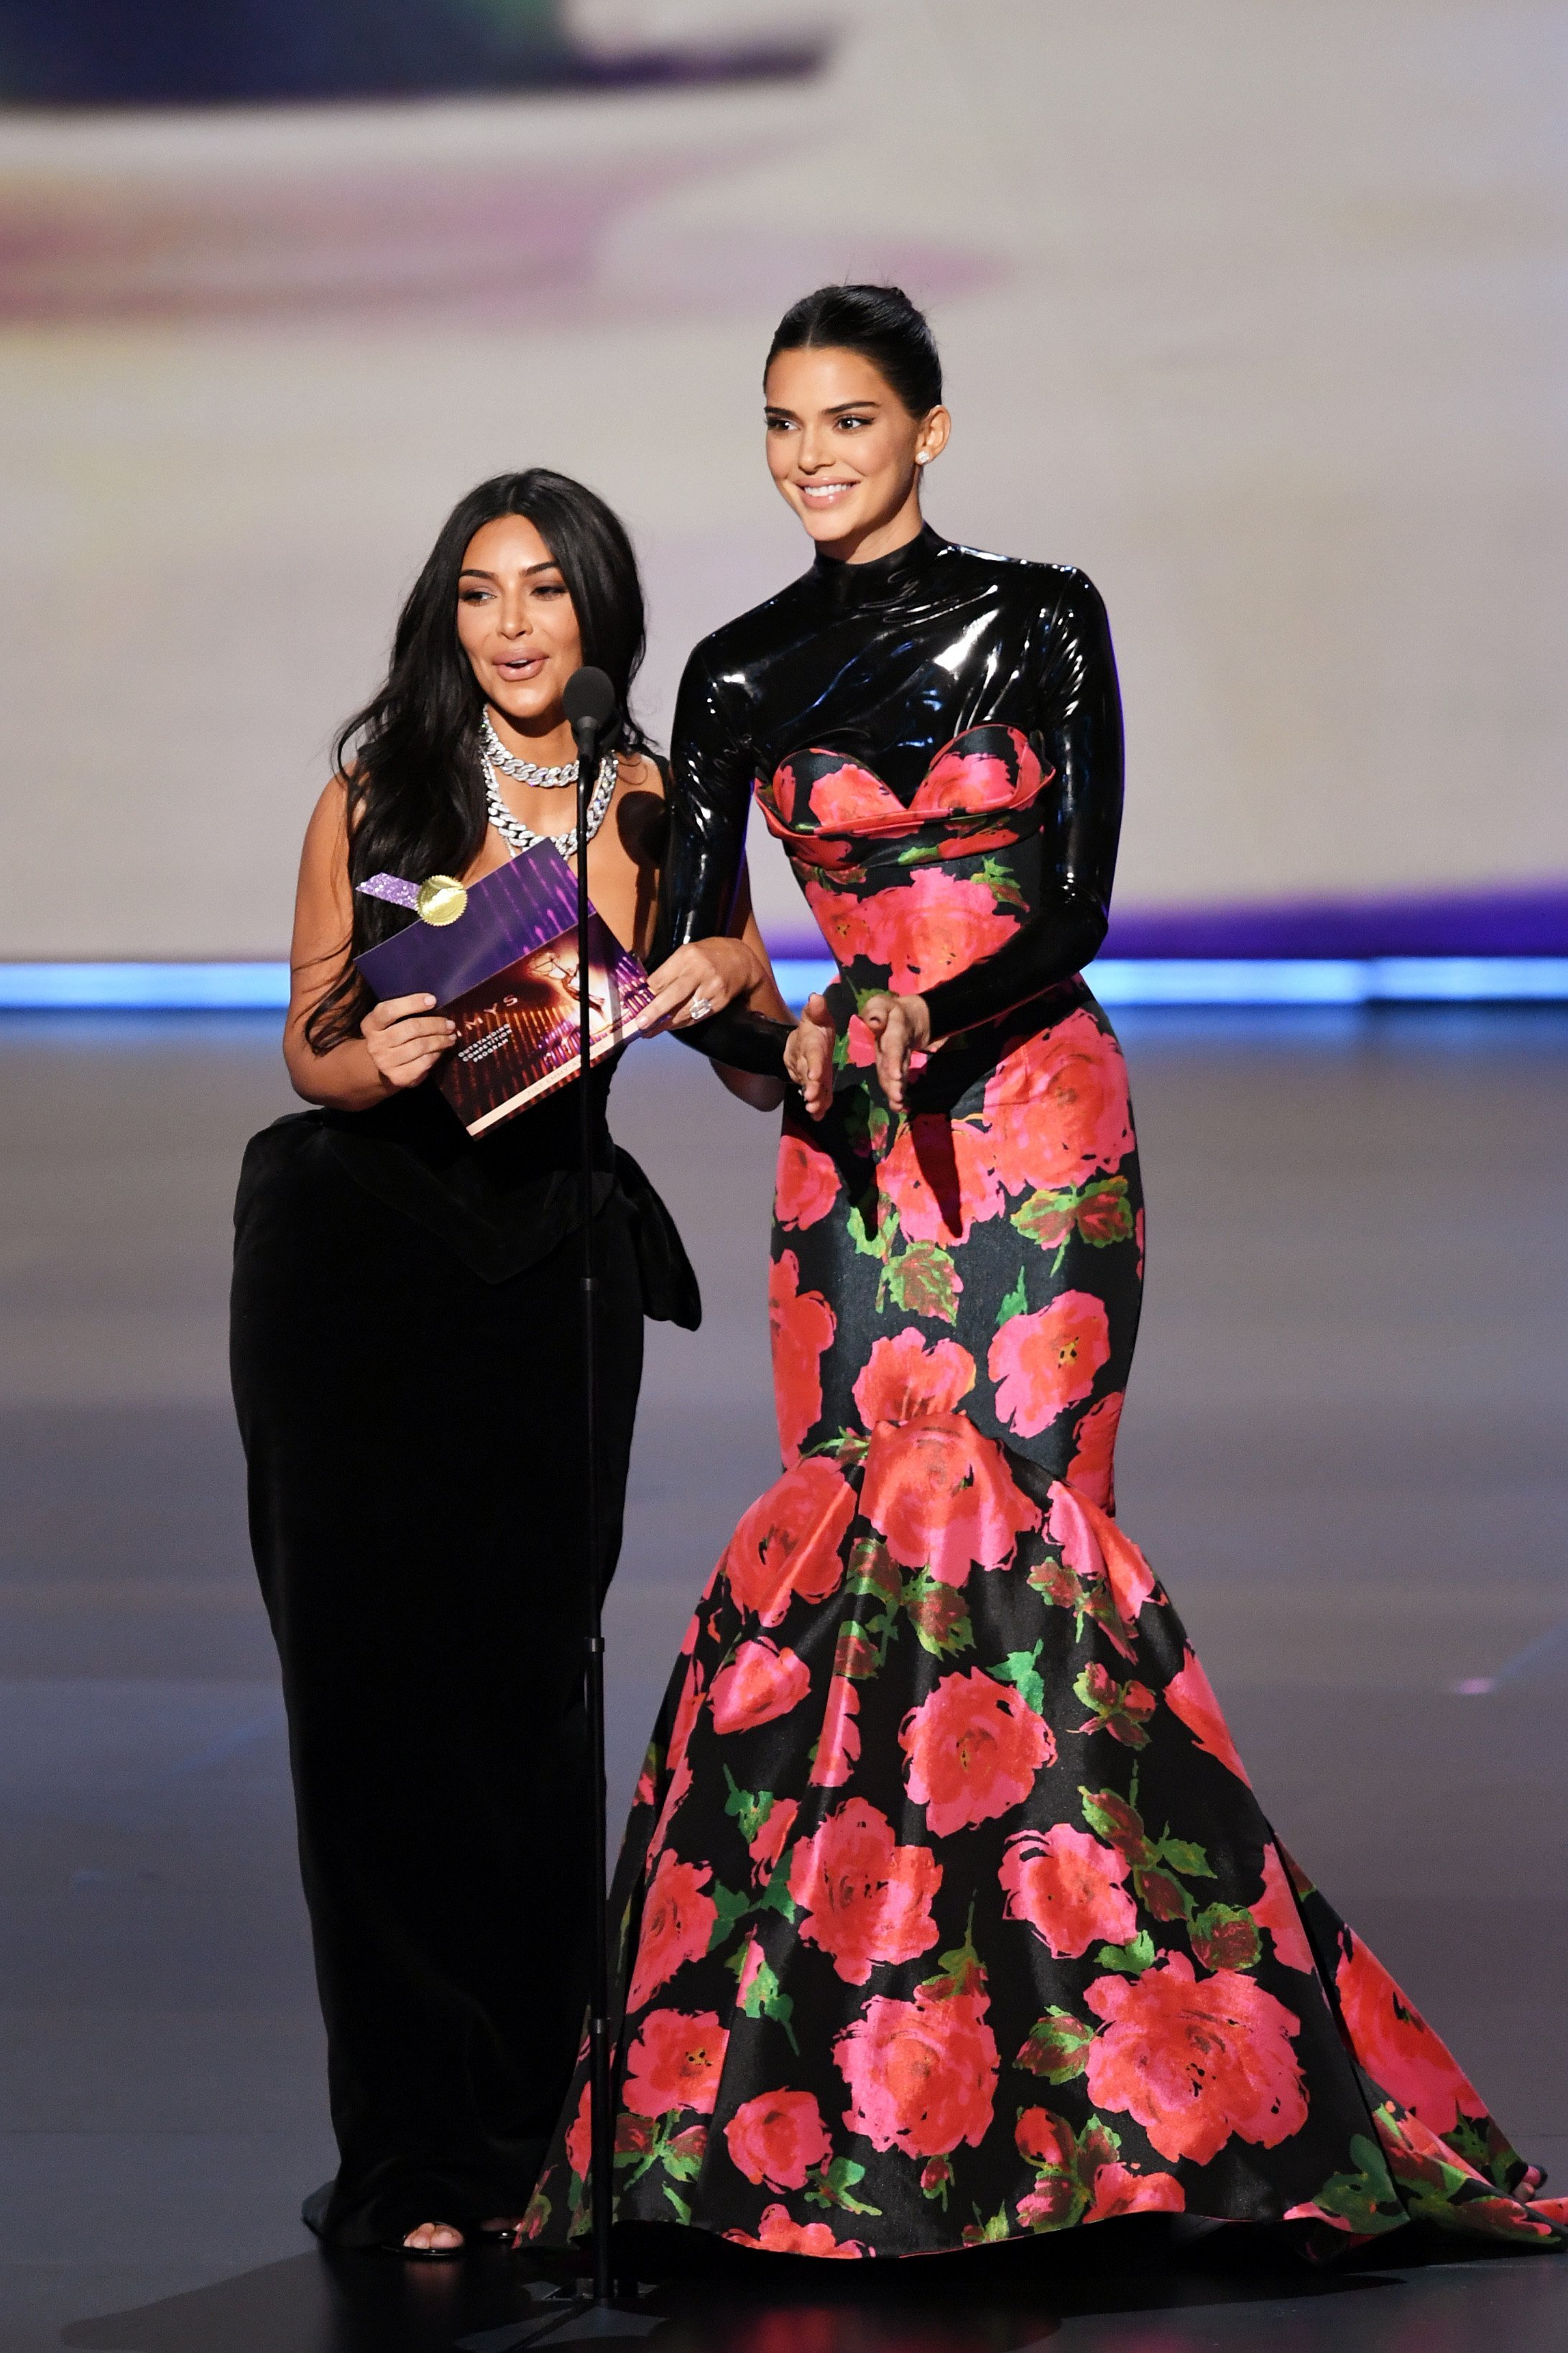 Kim Kardashian West and Kendall Jenner walk onstage during the 71st Emmy Awards. | Source: Getty Images